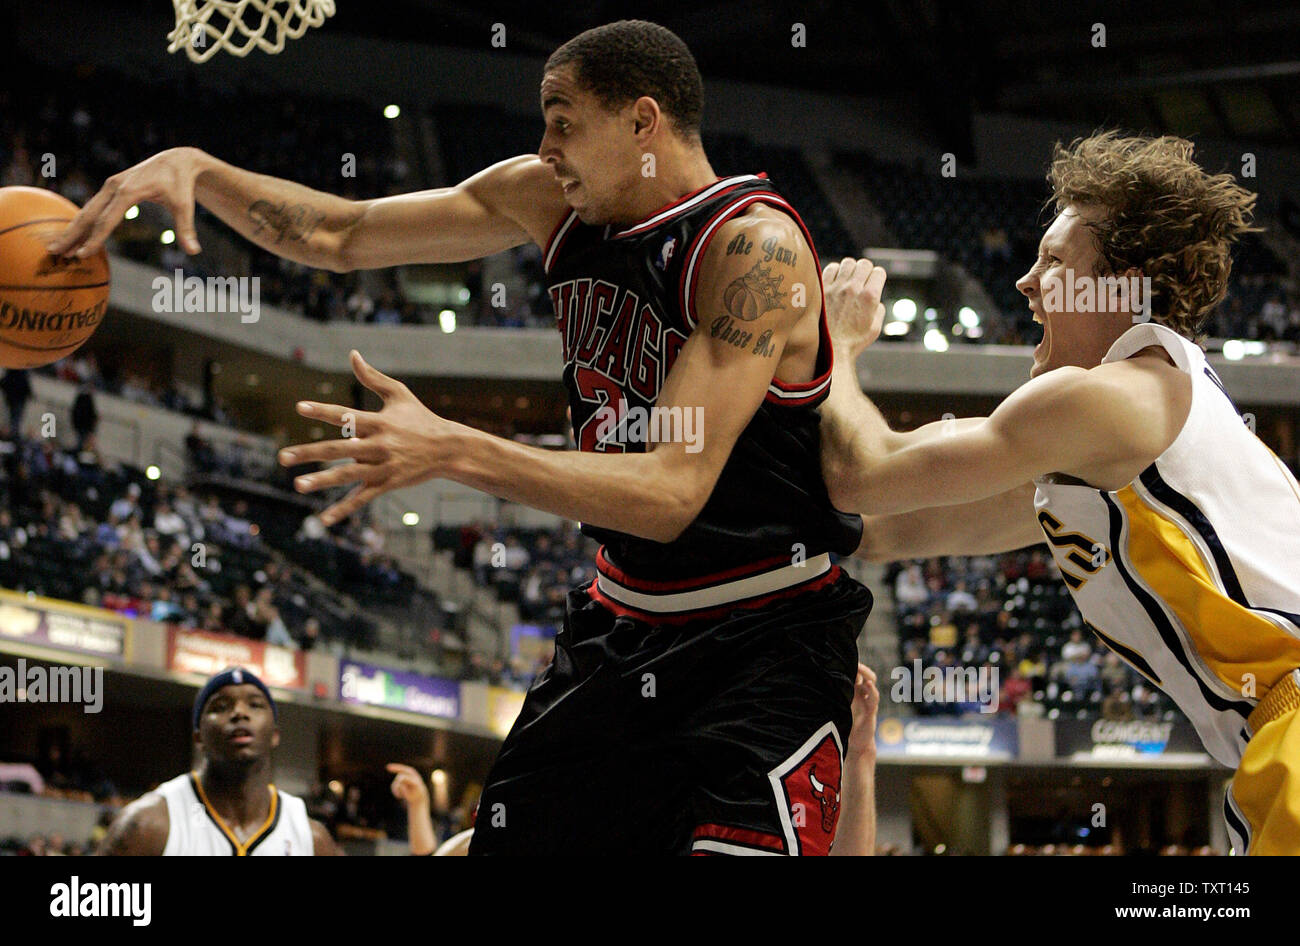 Chicago Bulls guard Thabo Sefolosha (2), from Switzerland, passes the ball away from Indiana Pacers guard Mike Dunleavy (17) at Conseco Fieldhouse in Indianapolis January 22, 2007. The Pacers defeated the Bulls 98-91. (UPI Photo/Mark Cowan) Stock Photo